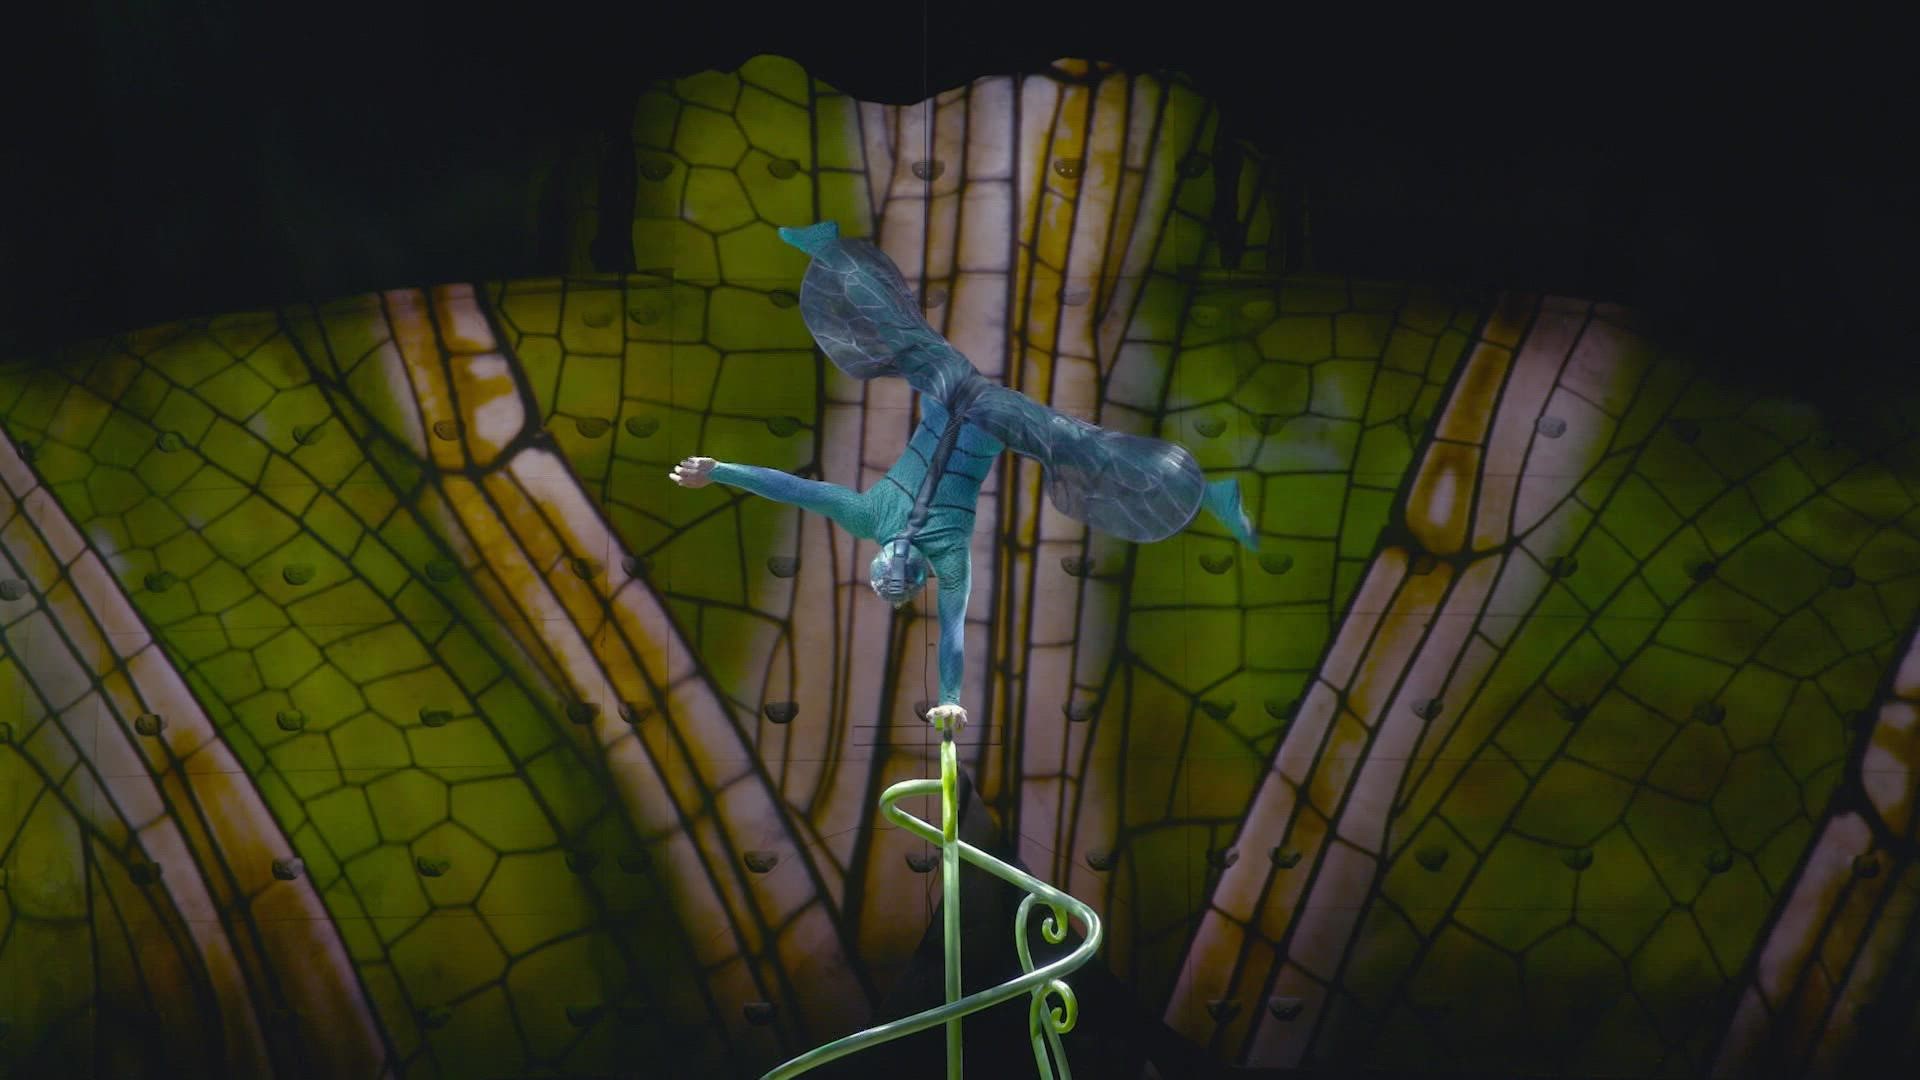 The show-stopping acrobats of Cirque du Soleil are returning to the Centennial State.